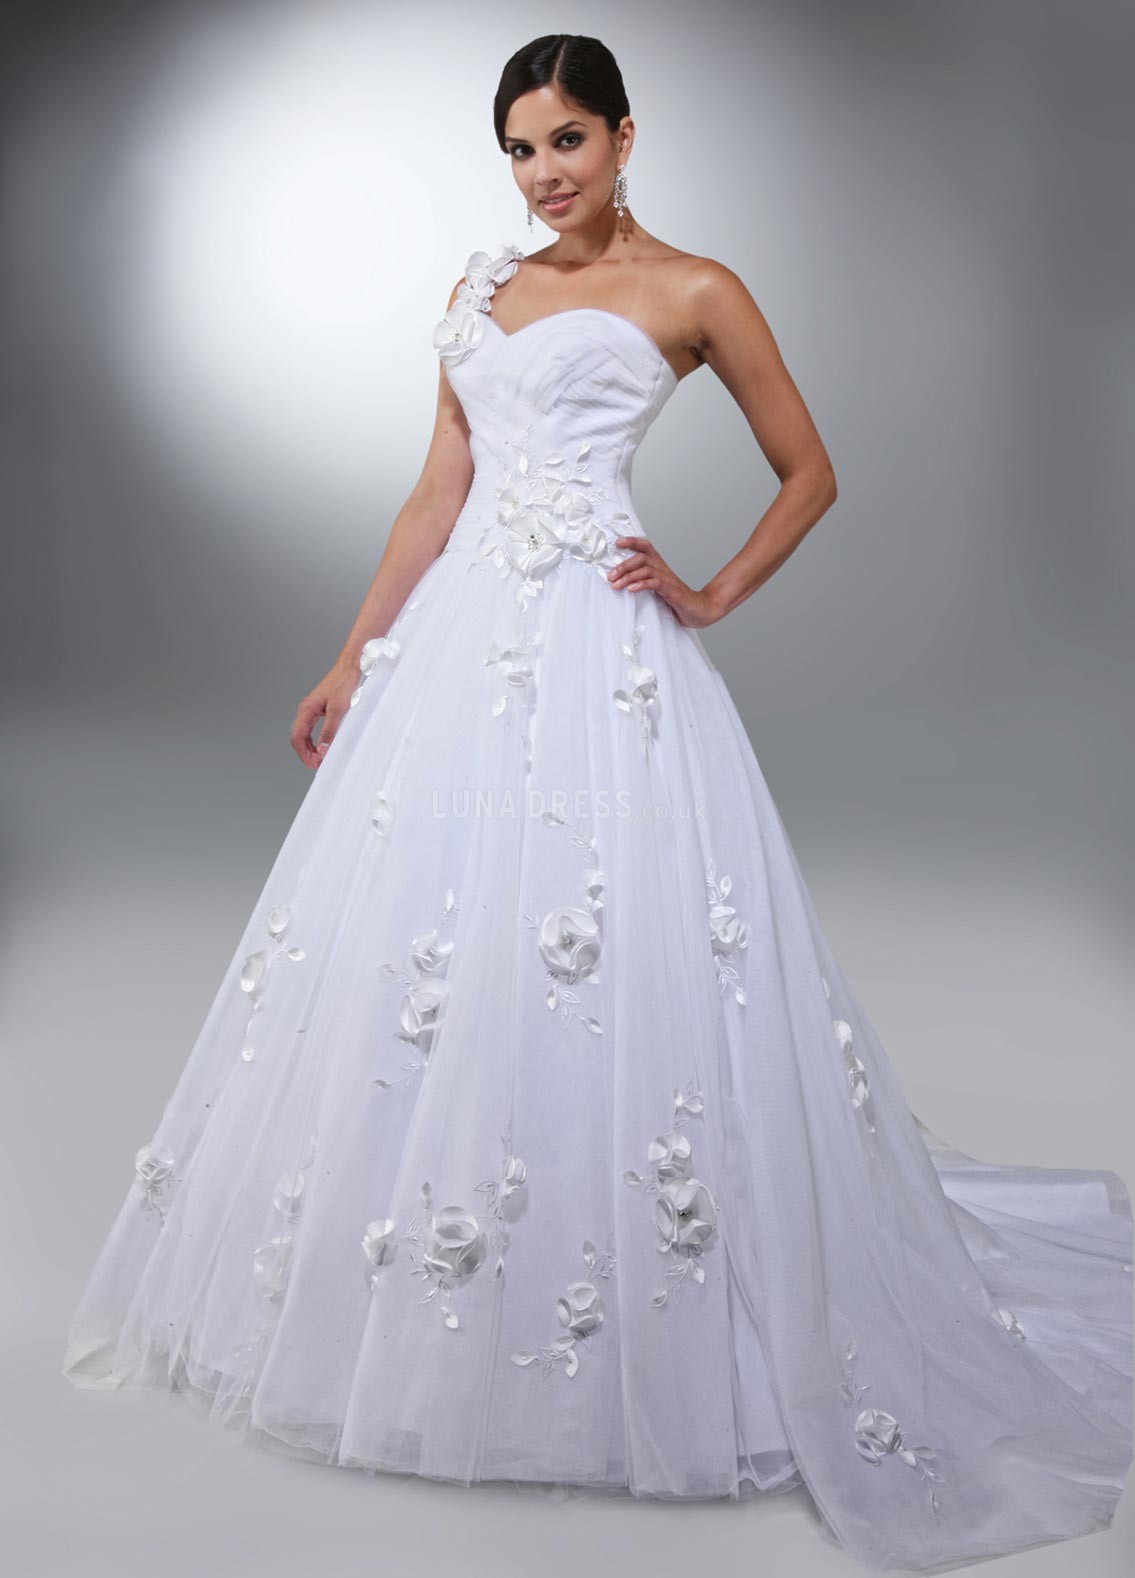 Great Wedding Dress Themes in the year 2023 The ultimate guide ...